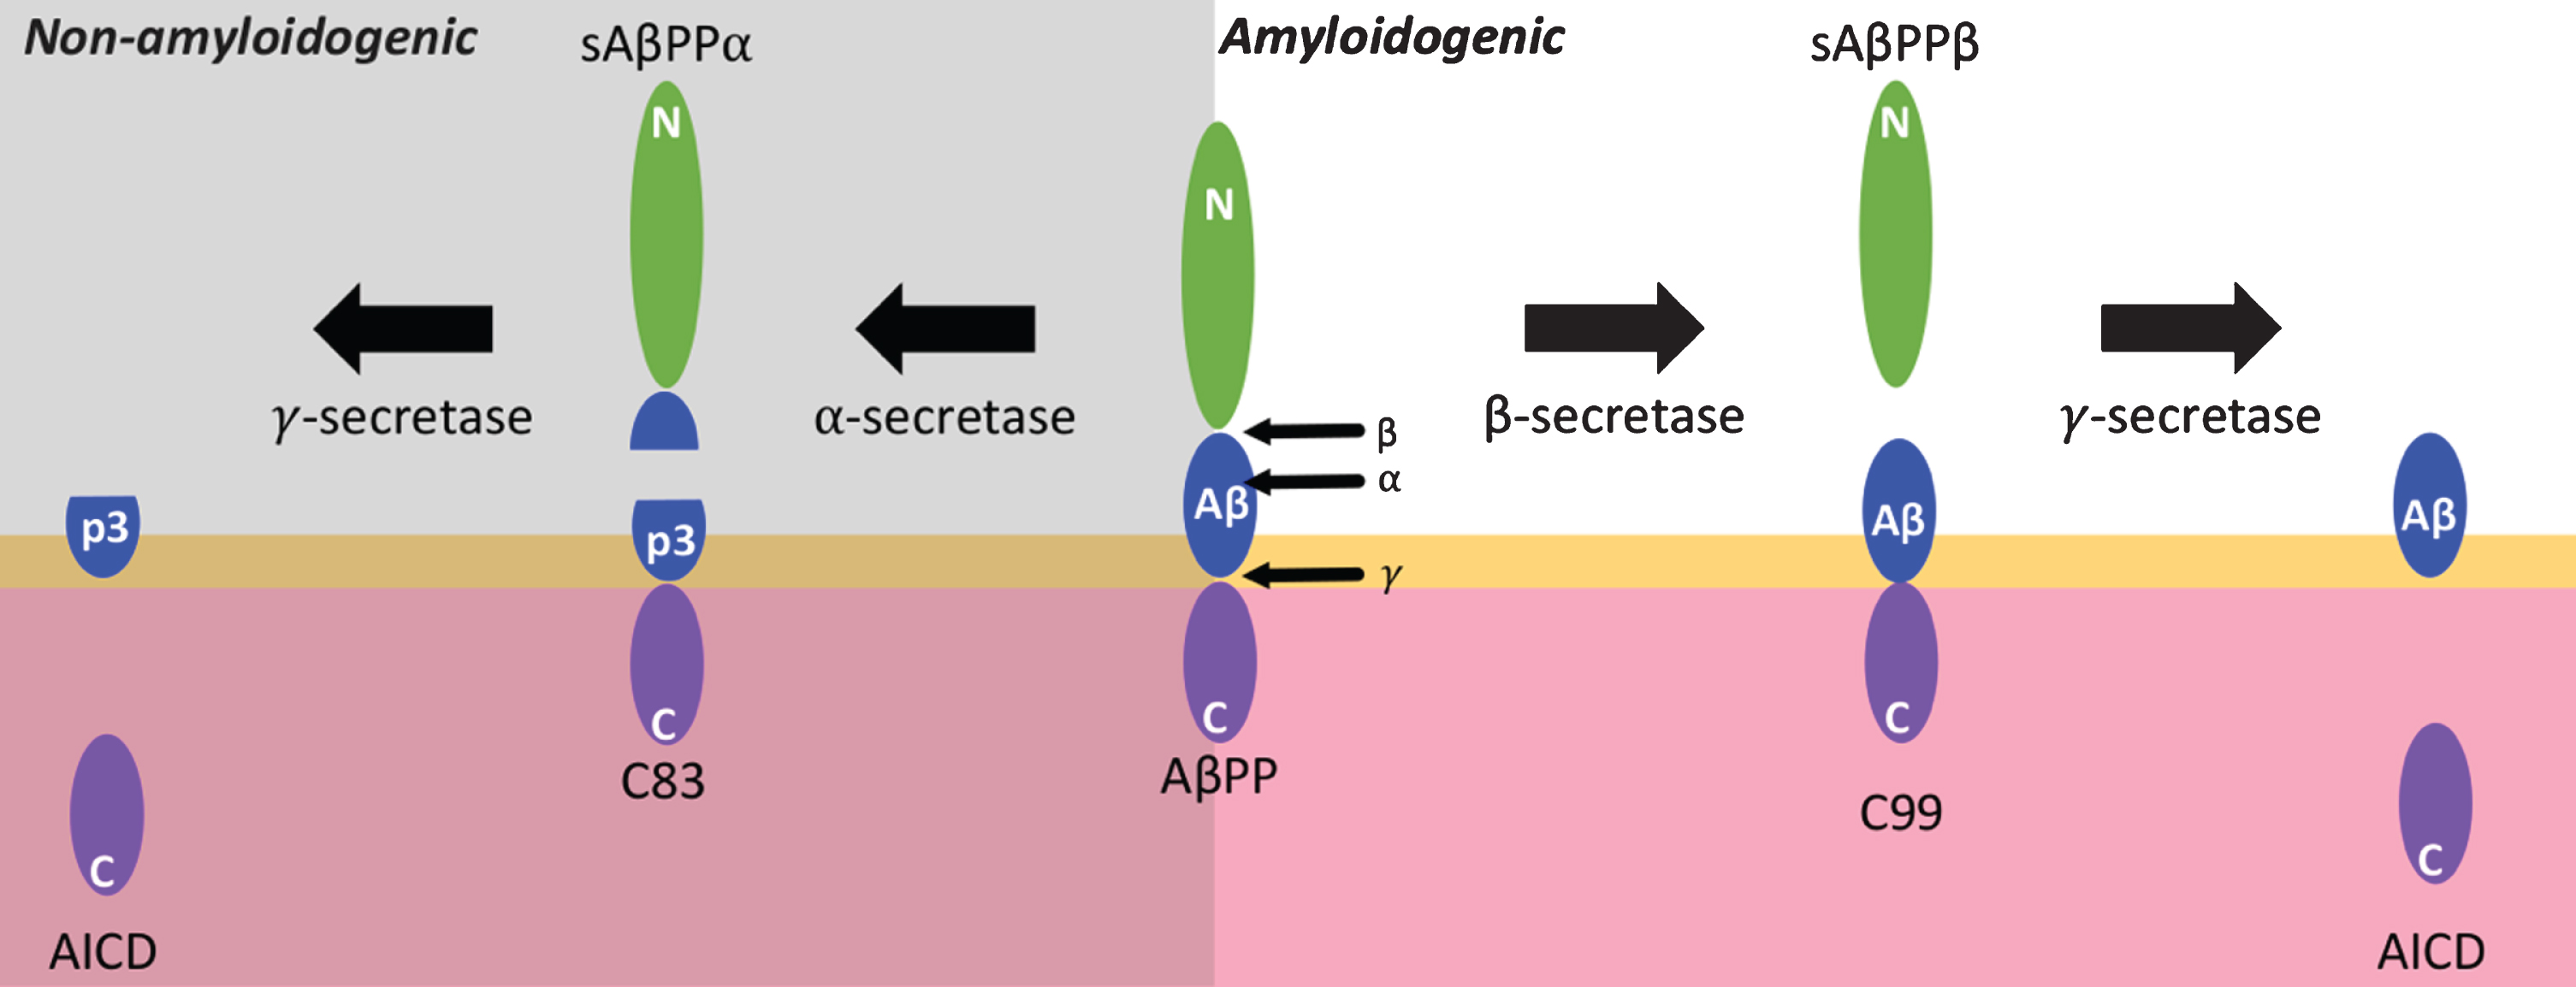 Proteolytic processing of AβPP. Membrane bound amyloid-β protein precursor (AβPP) can be subjected to non-amyloidogenic or amyloidogenic processing. In the non-amyloidogenic pathway, AβPP is first cleaved by α-secretase within the amyloid-β (Aβ) sequence, producing a soluble sAβPPα fragment and a membrane-bound C83 fragment. C83 can be processed further by the γ-secretase complex to give a p3 fragment and an AβPP intracellular domain (AICD). In the amyloidogenic pathway, AβPP can be cleaved by β-secretase, giving the C99 and sAβPPβ fragments. Then C99 is cleaved by γ-secretase to give Aβ peptides and an AICD. β-secretase and γ-secretase may function together as a supramolecular complex. Yellow depicts a lipid bi-layer and pink depicts a cytosolic region.